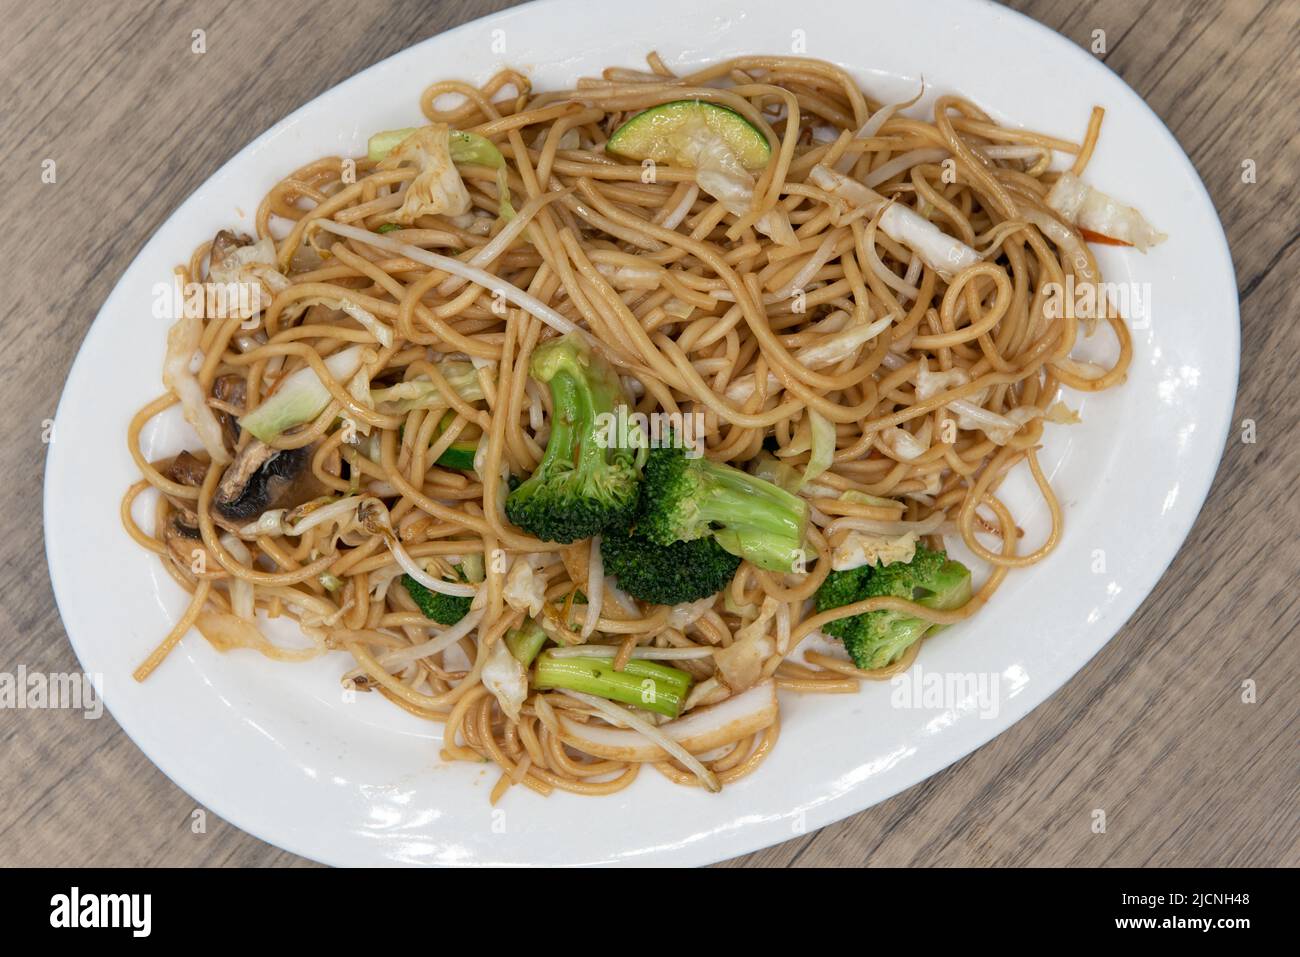 Overhead view of generous plate of vegetable noodles glazed in sauce and piled high on the plate for a great Chinese food meal. Stock Photo